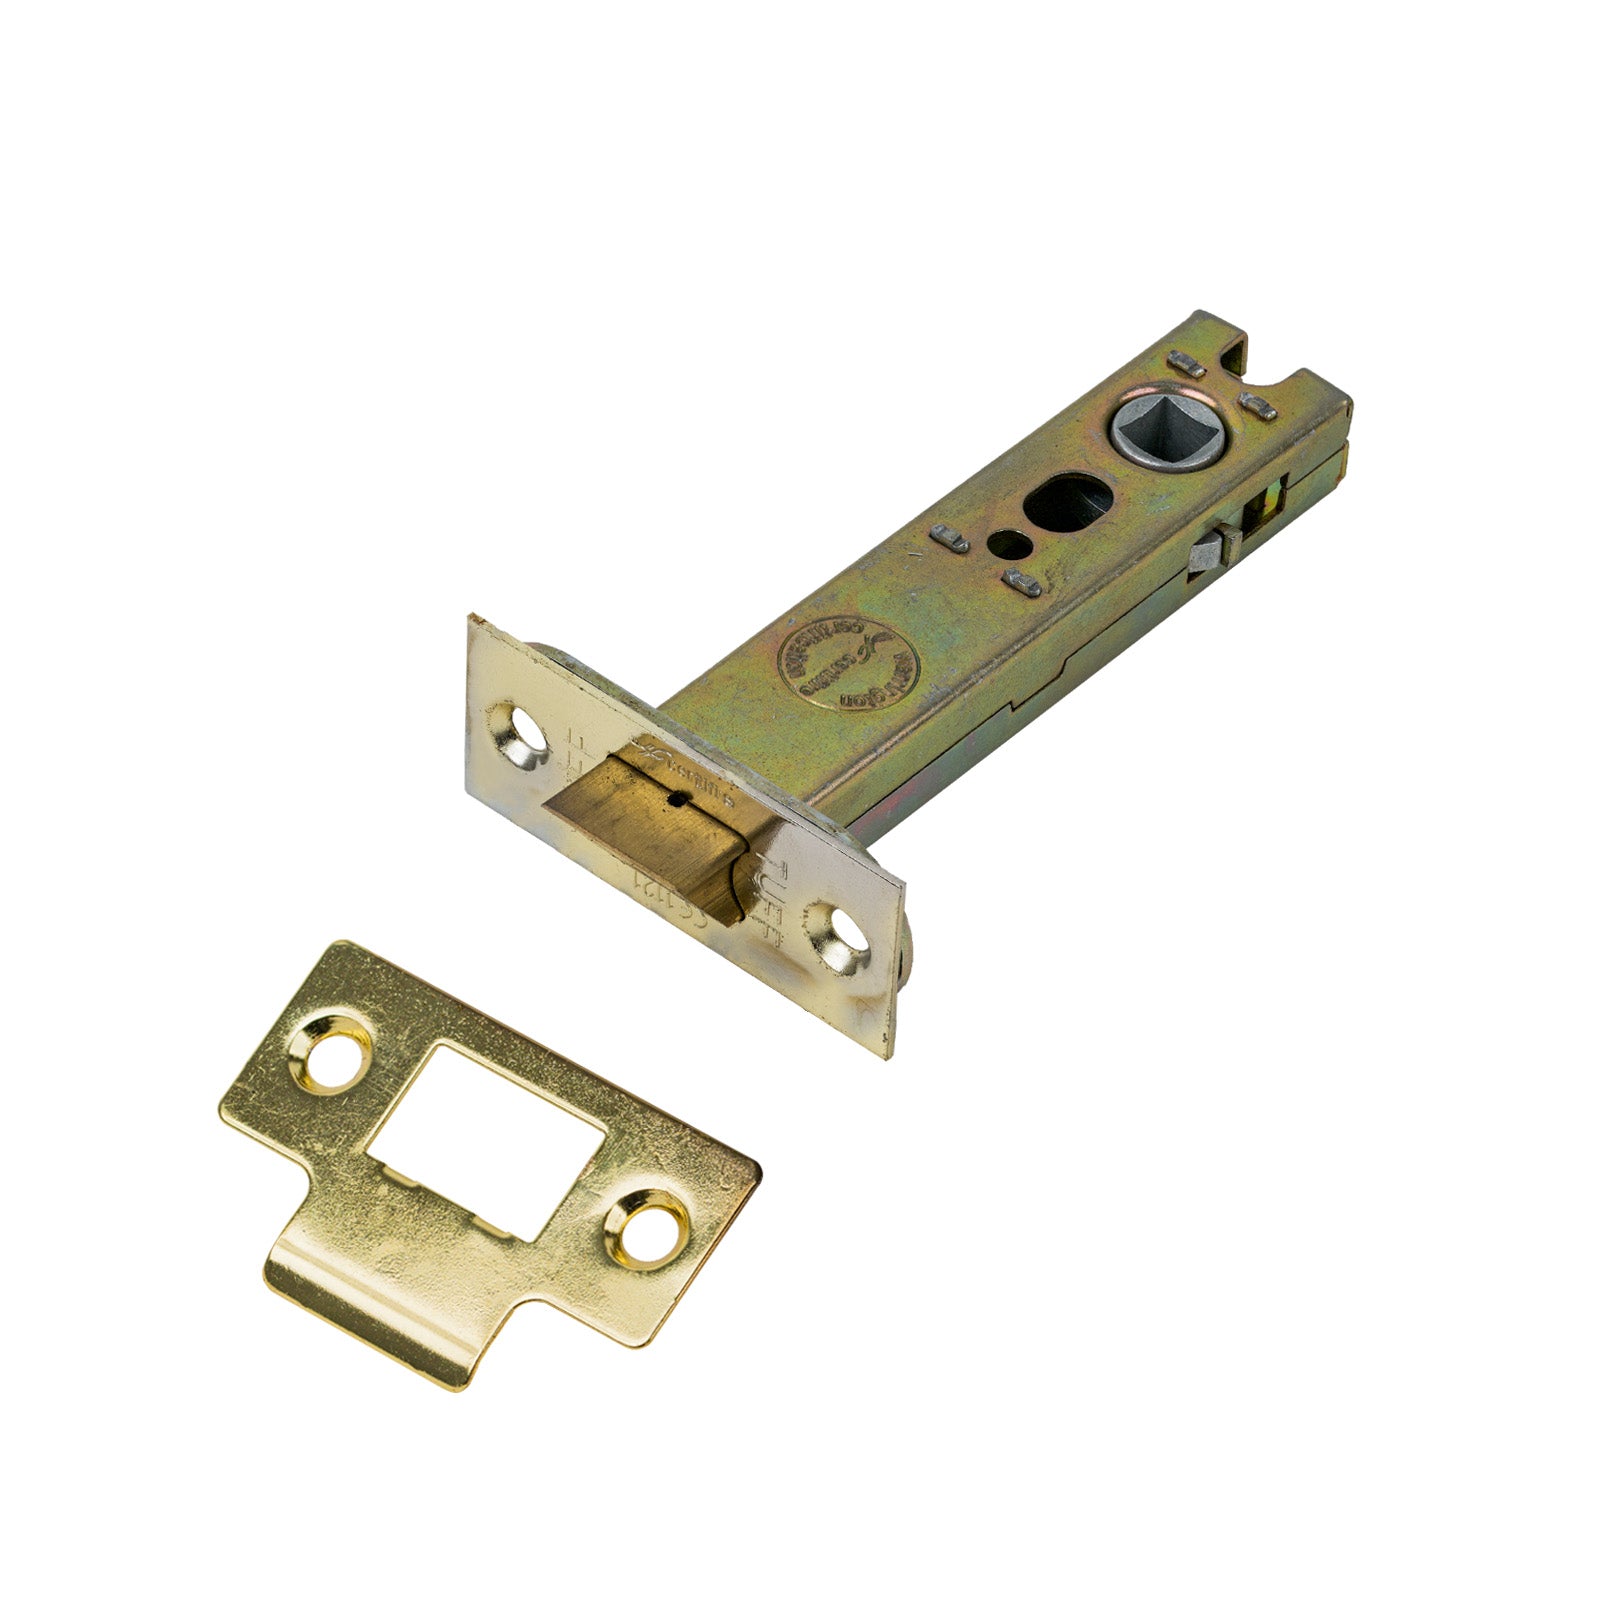 SHOW Heavy Duty Tubular Latch - 4 Inch with Polished brass finished forend and striker plate